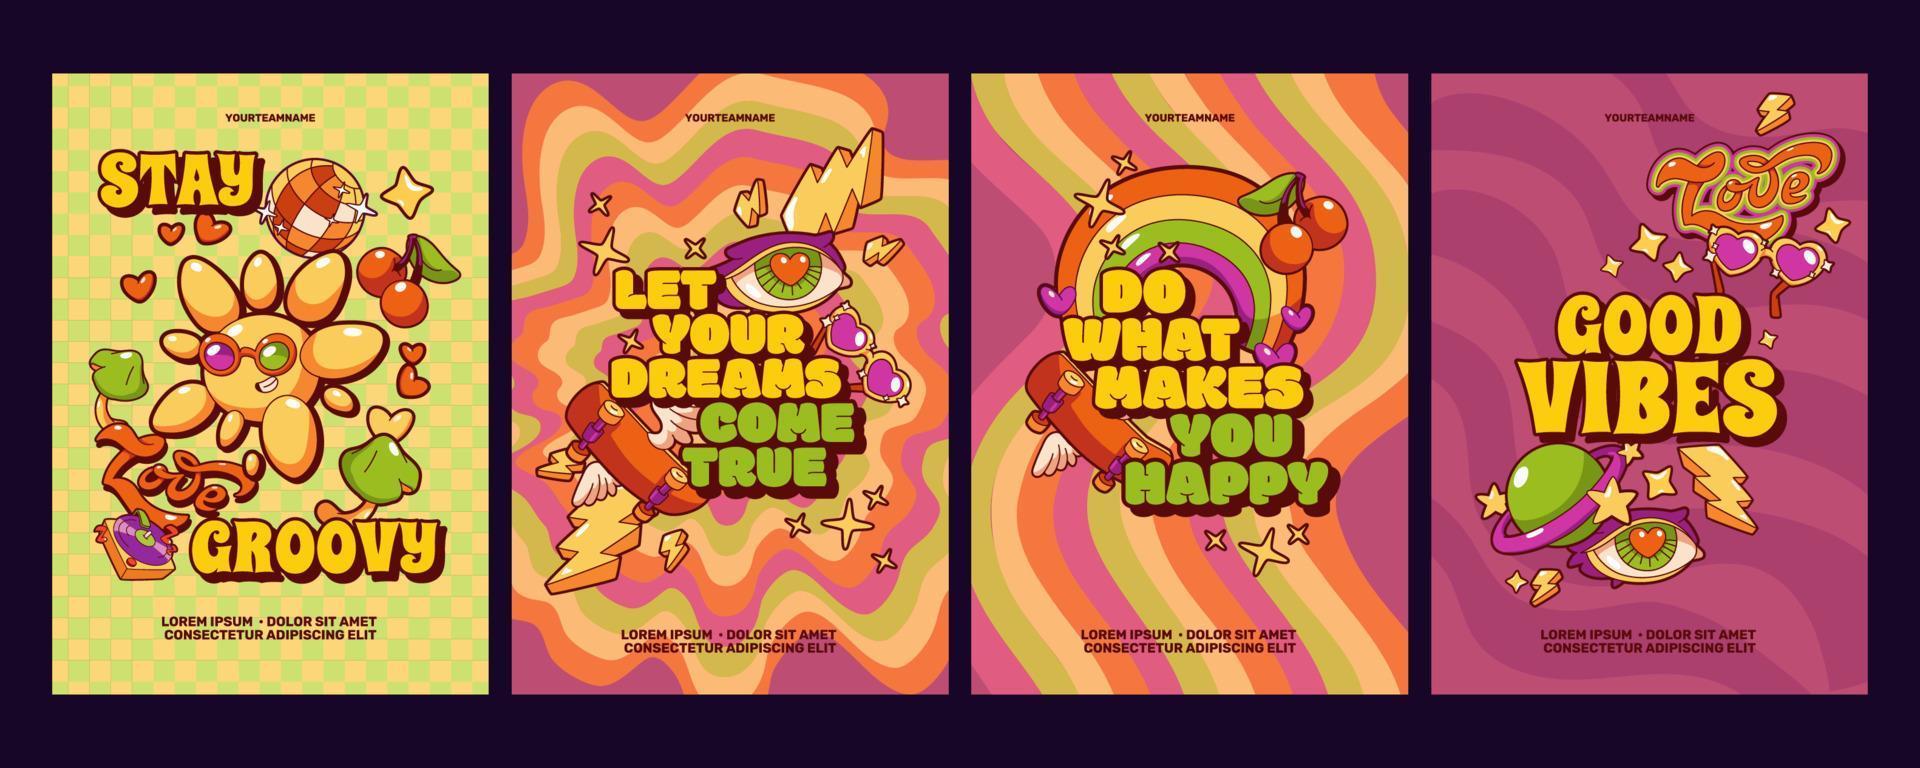 Retro groovy vibe posters with motivation phrases vector